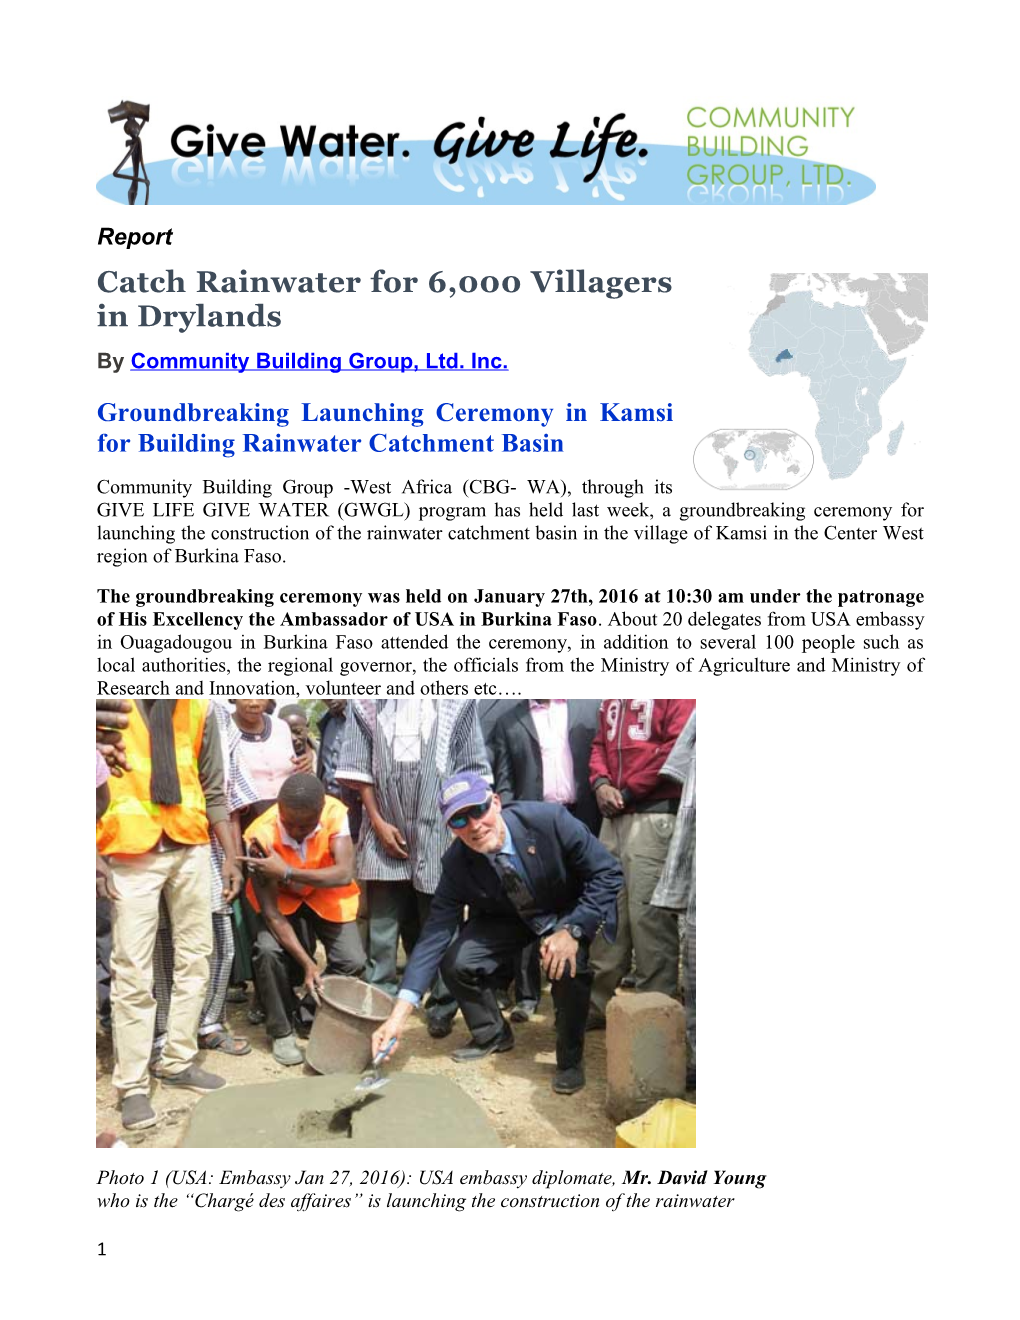 Groundbreaking Launching Ceremony in Kamsi for Building Rainwater Catchment Basin